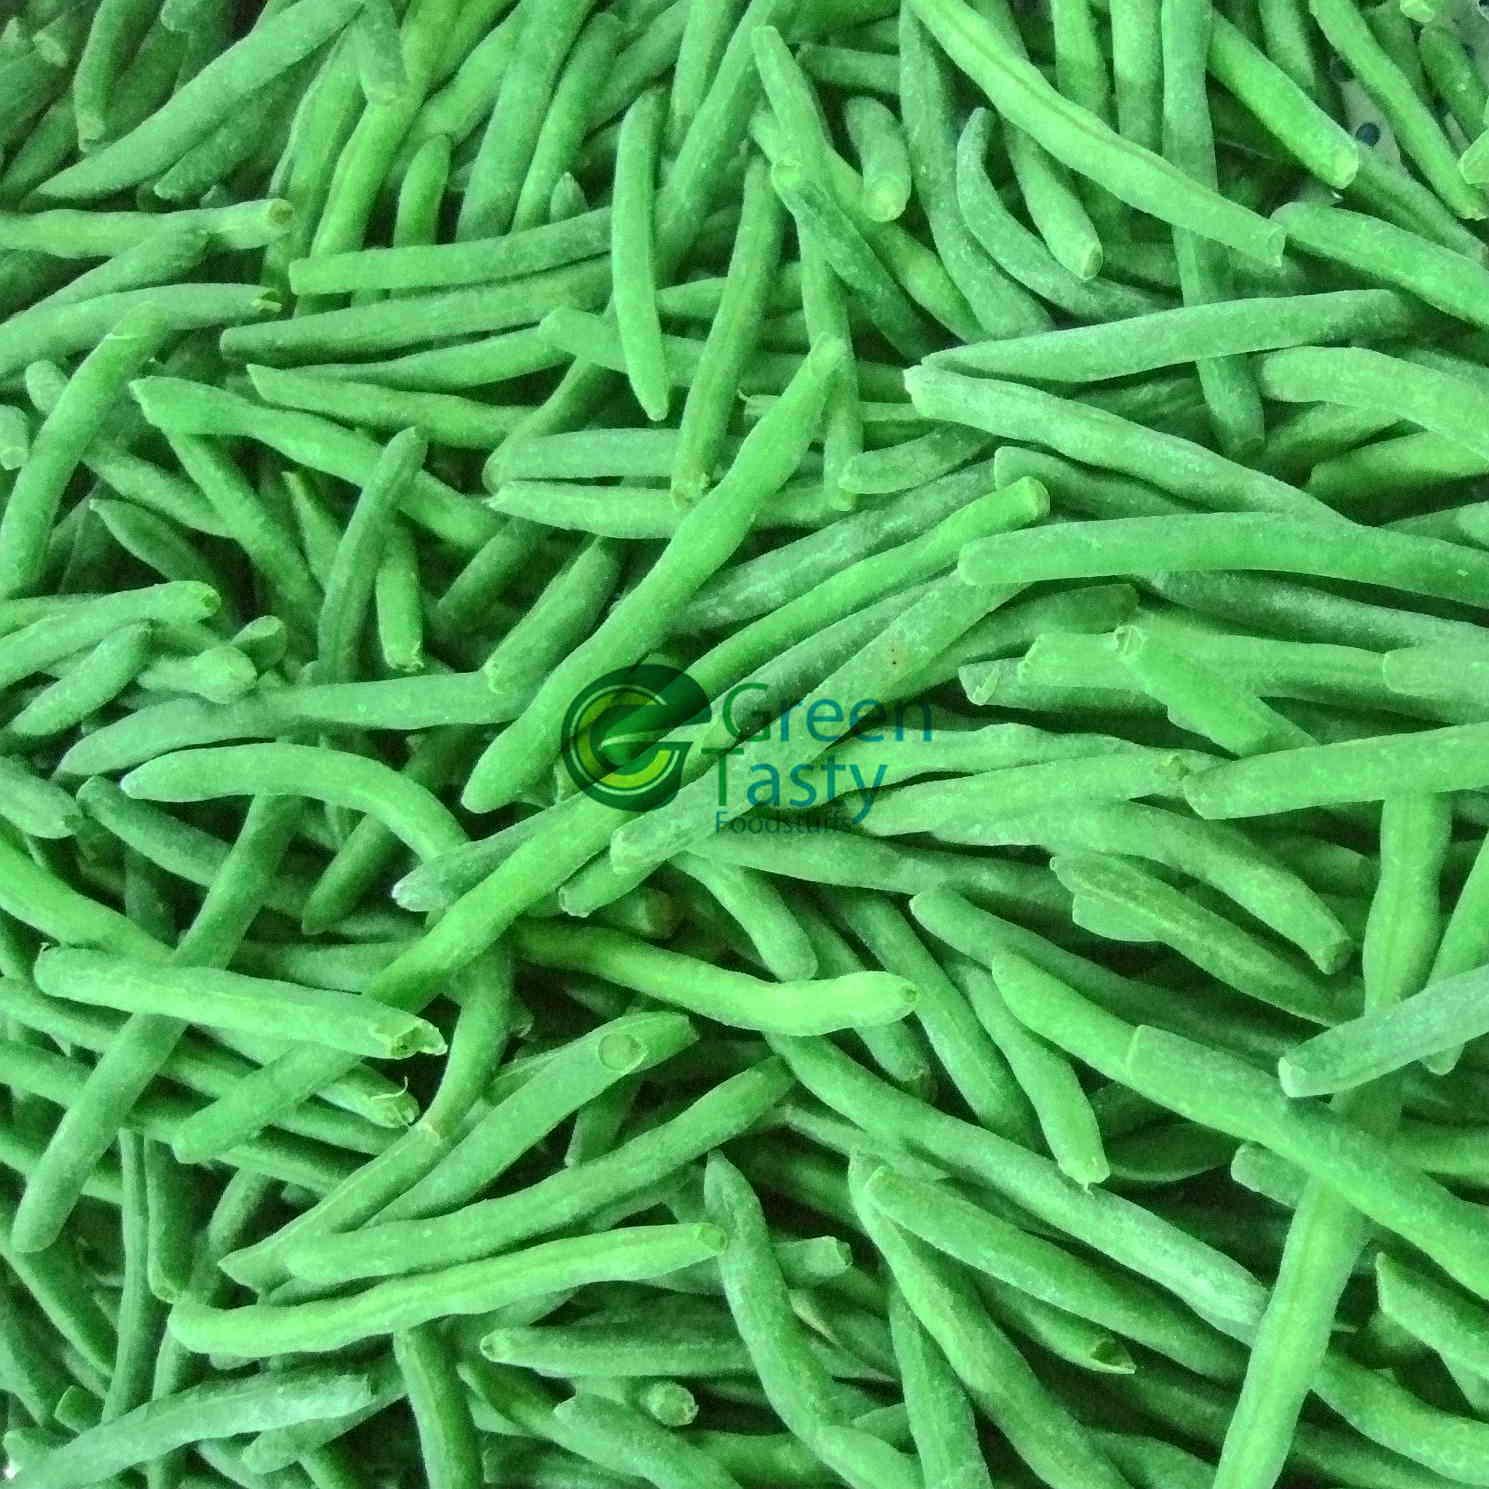 IQF Frozen Whole/Cuts Green Beans